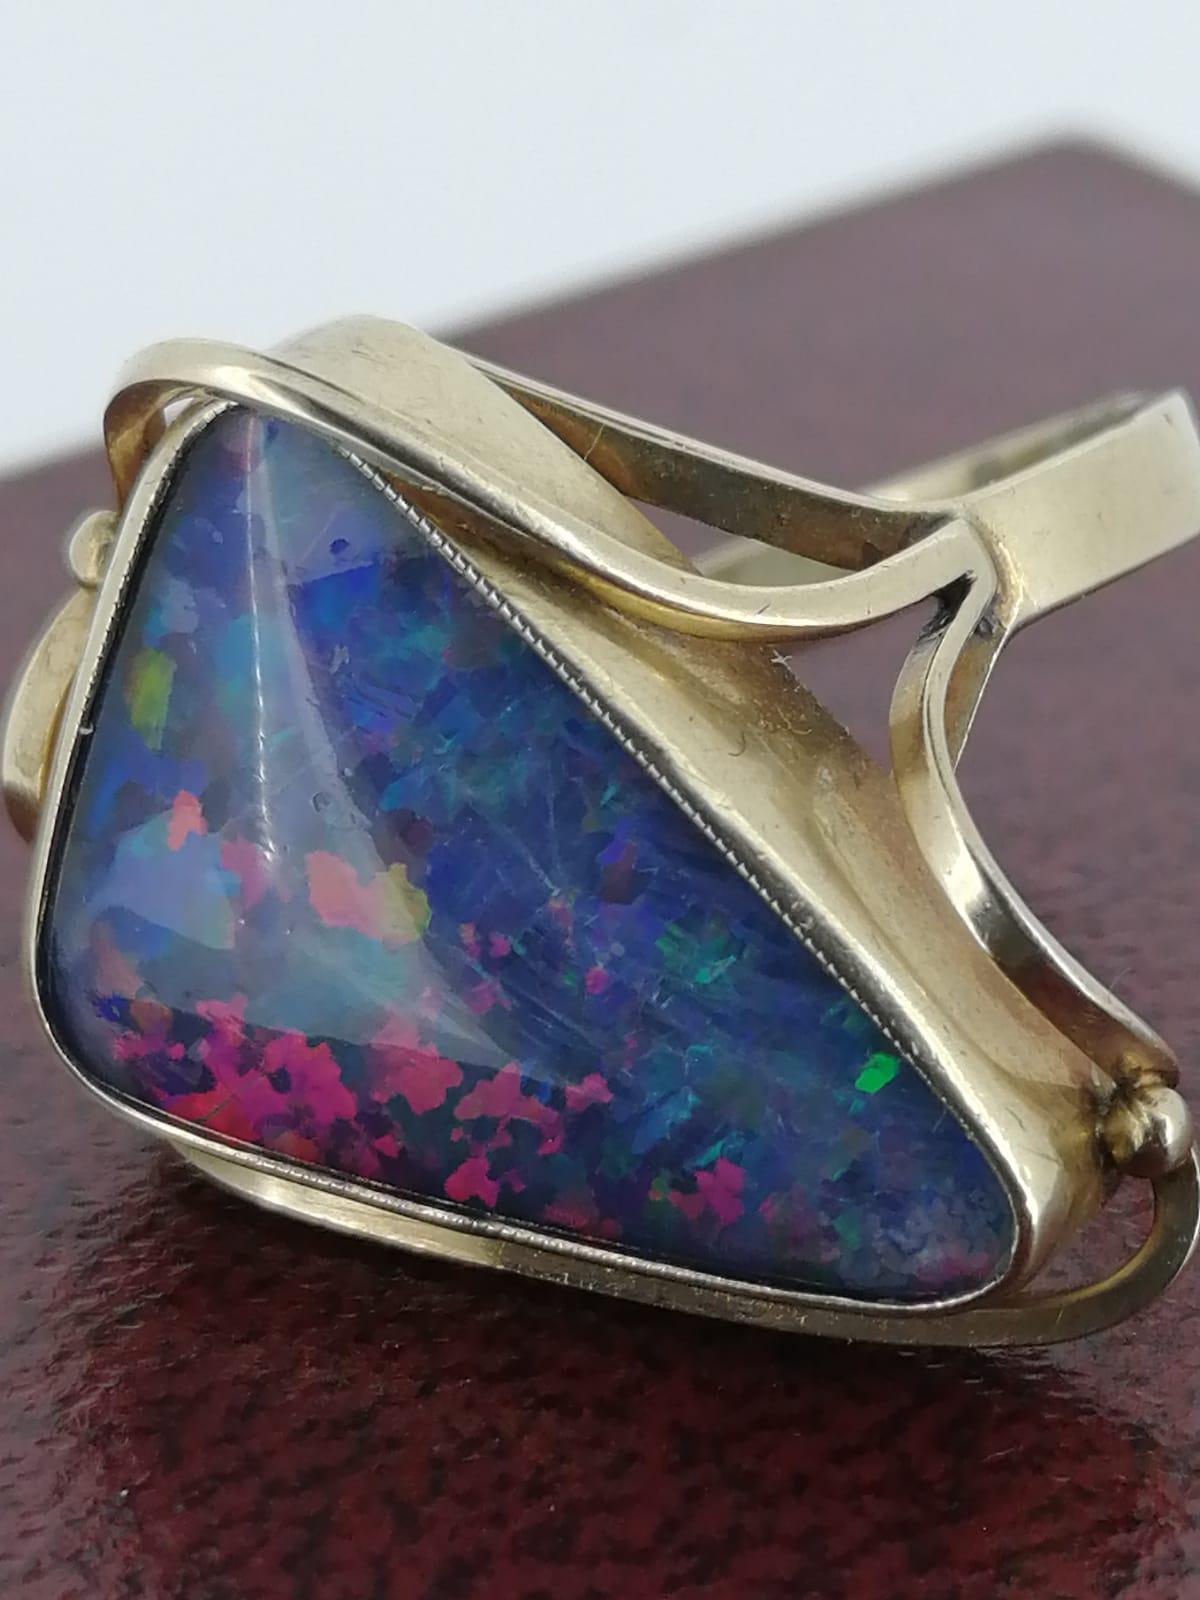 Of Australian provenance, 
this ring is crafted in 9K Yellow Gold,
centrally set with 
an Australian Opal Doublet 
of very unusual triangle shape
of impressive 4.50ct 
(20mm x 14mm approx.), 
displaying the most unique & stunning 
myriad of